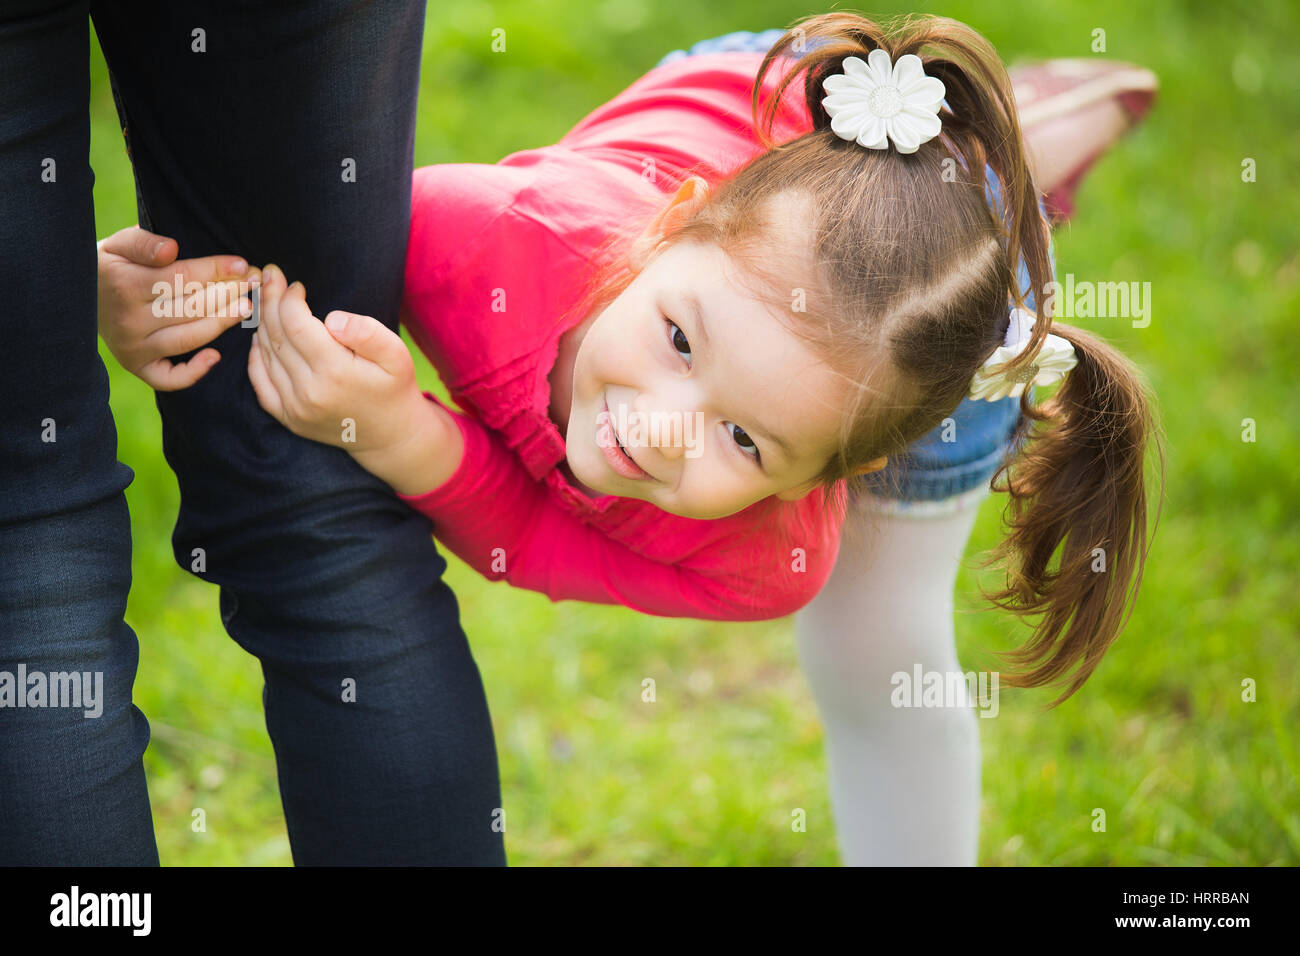 Closeup portrait of happy family over green grass background. Little funny girl of 4 years age playing outside with her parents in spring city park. H Stock Photo